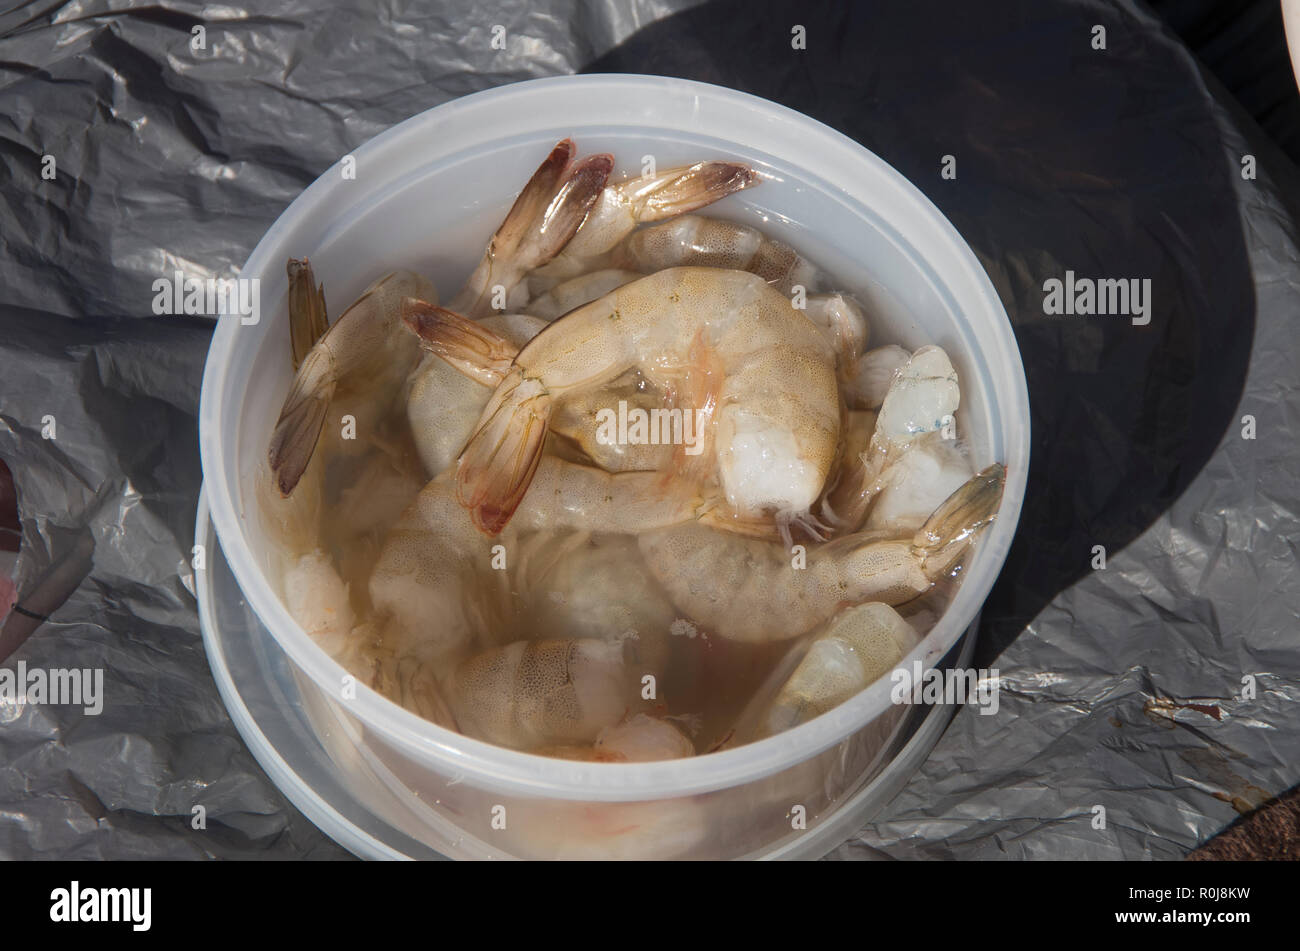 A tub of bait shrimp is ready for a fisherman’s use on the Bouge Inlet Pier in Emerald Isle ,North Carolina. Stock Photo